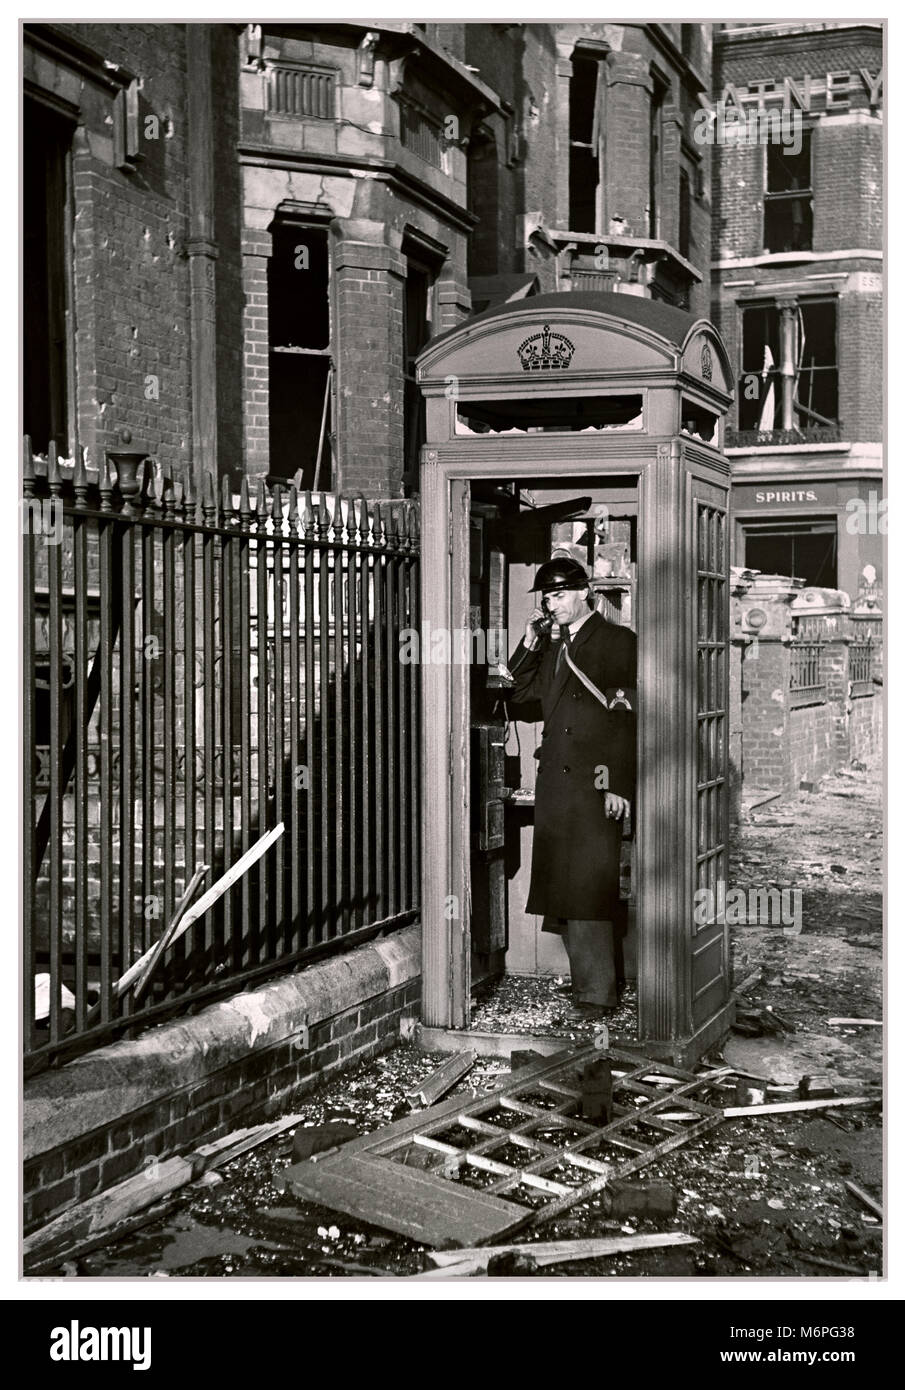 Vintage 1940’s WW2 London Blitz image of bombed out London street with warden still using traditional British telephone box despite the significant damage.... ‘Keep calm and carry on...’ Stock Photo